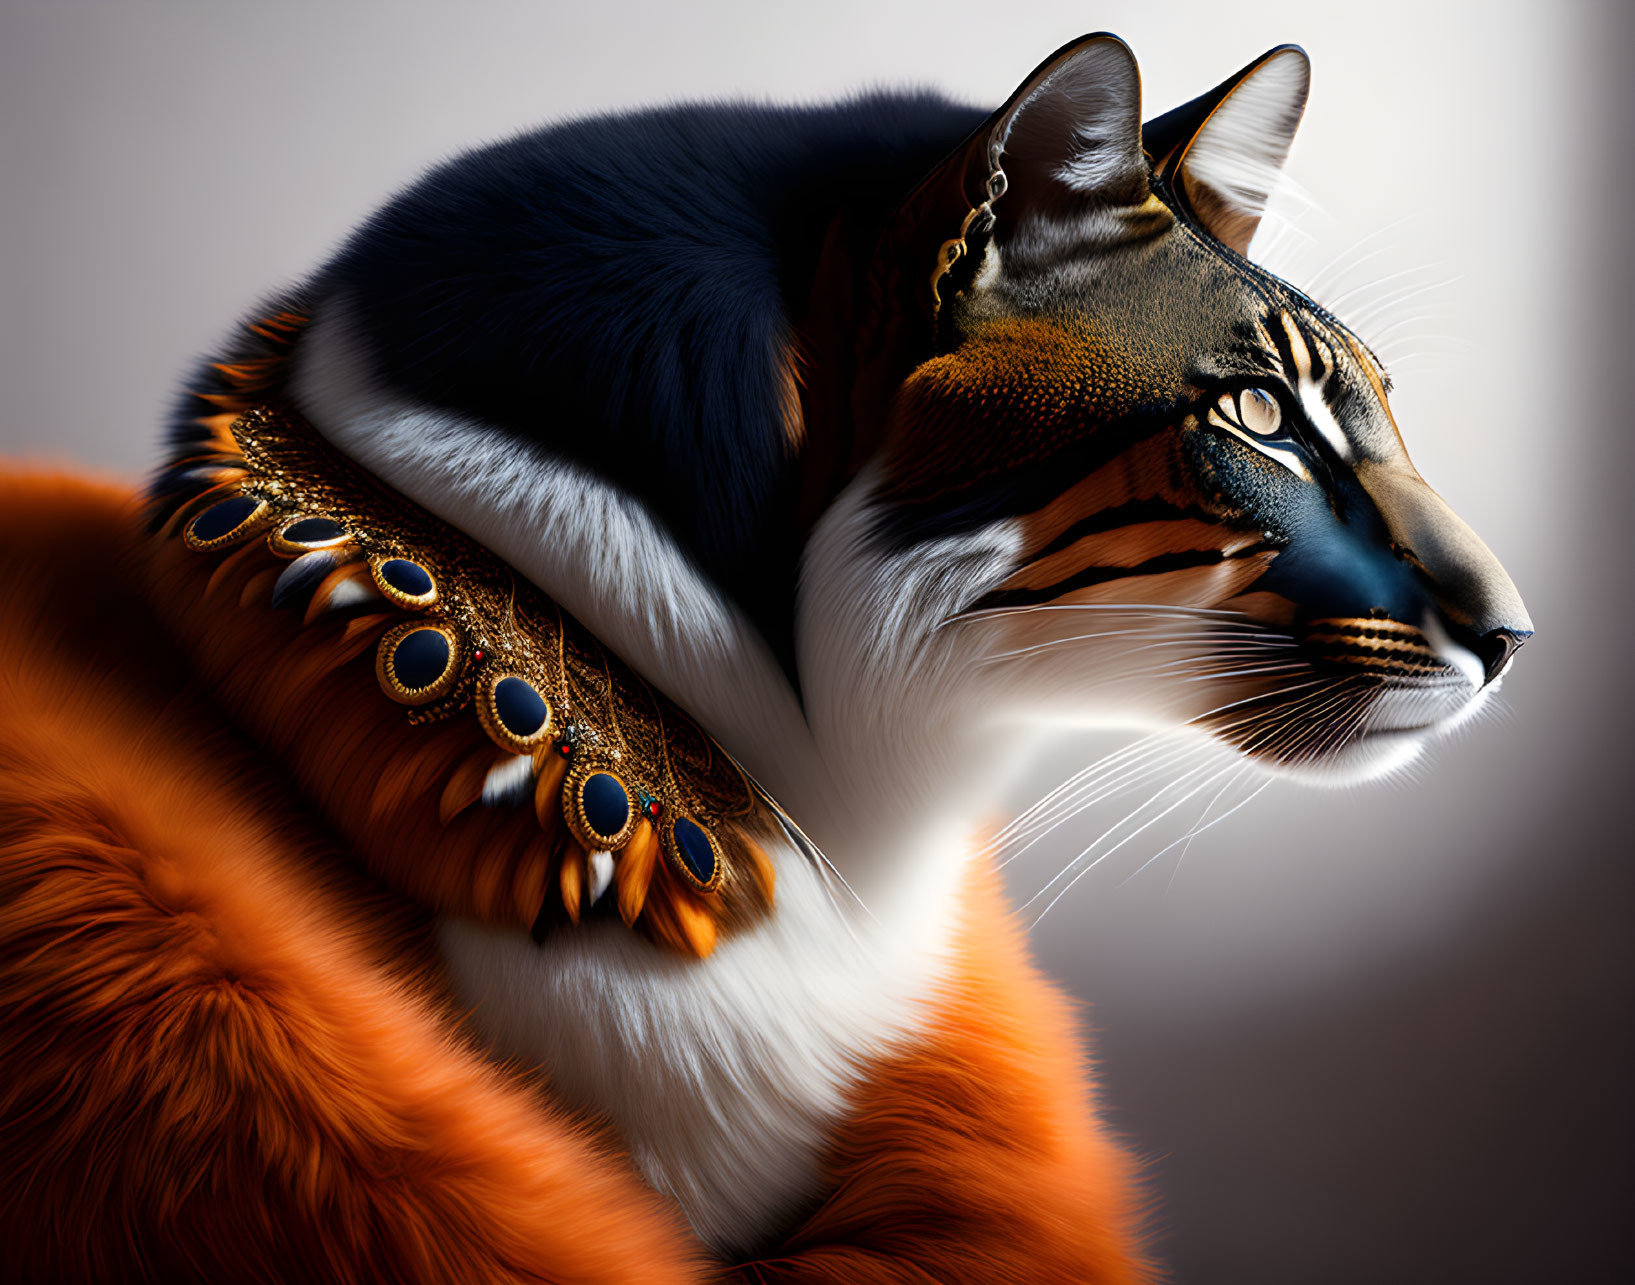 Digital Art: Cat with Tiger Face and Jewelry on Gradient Background